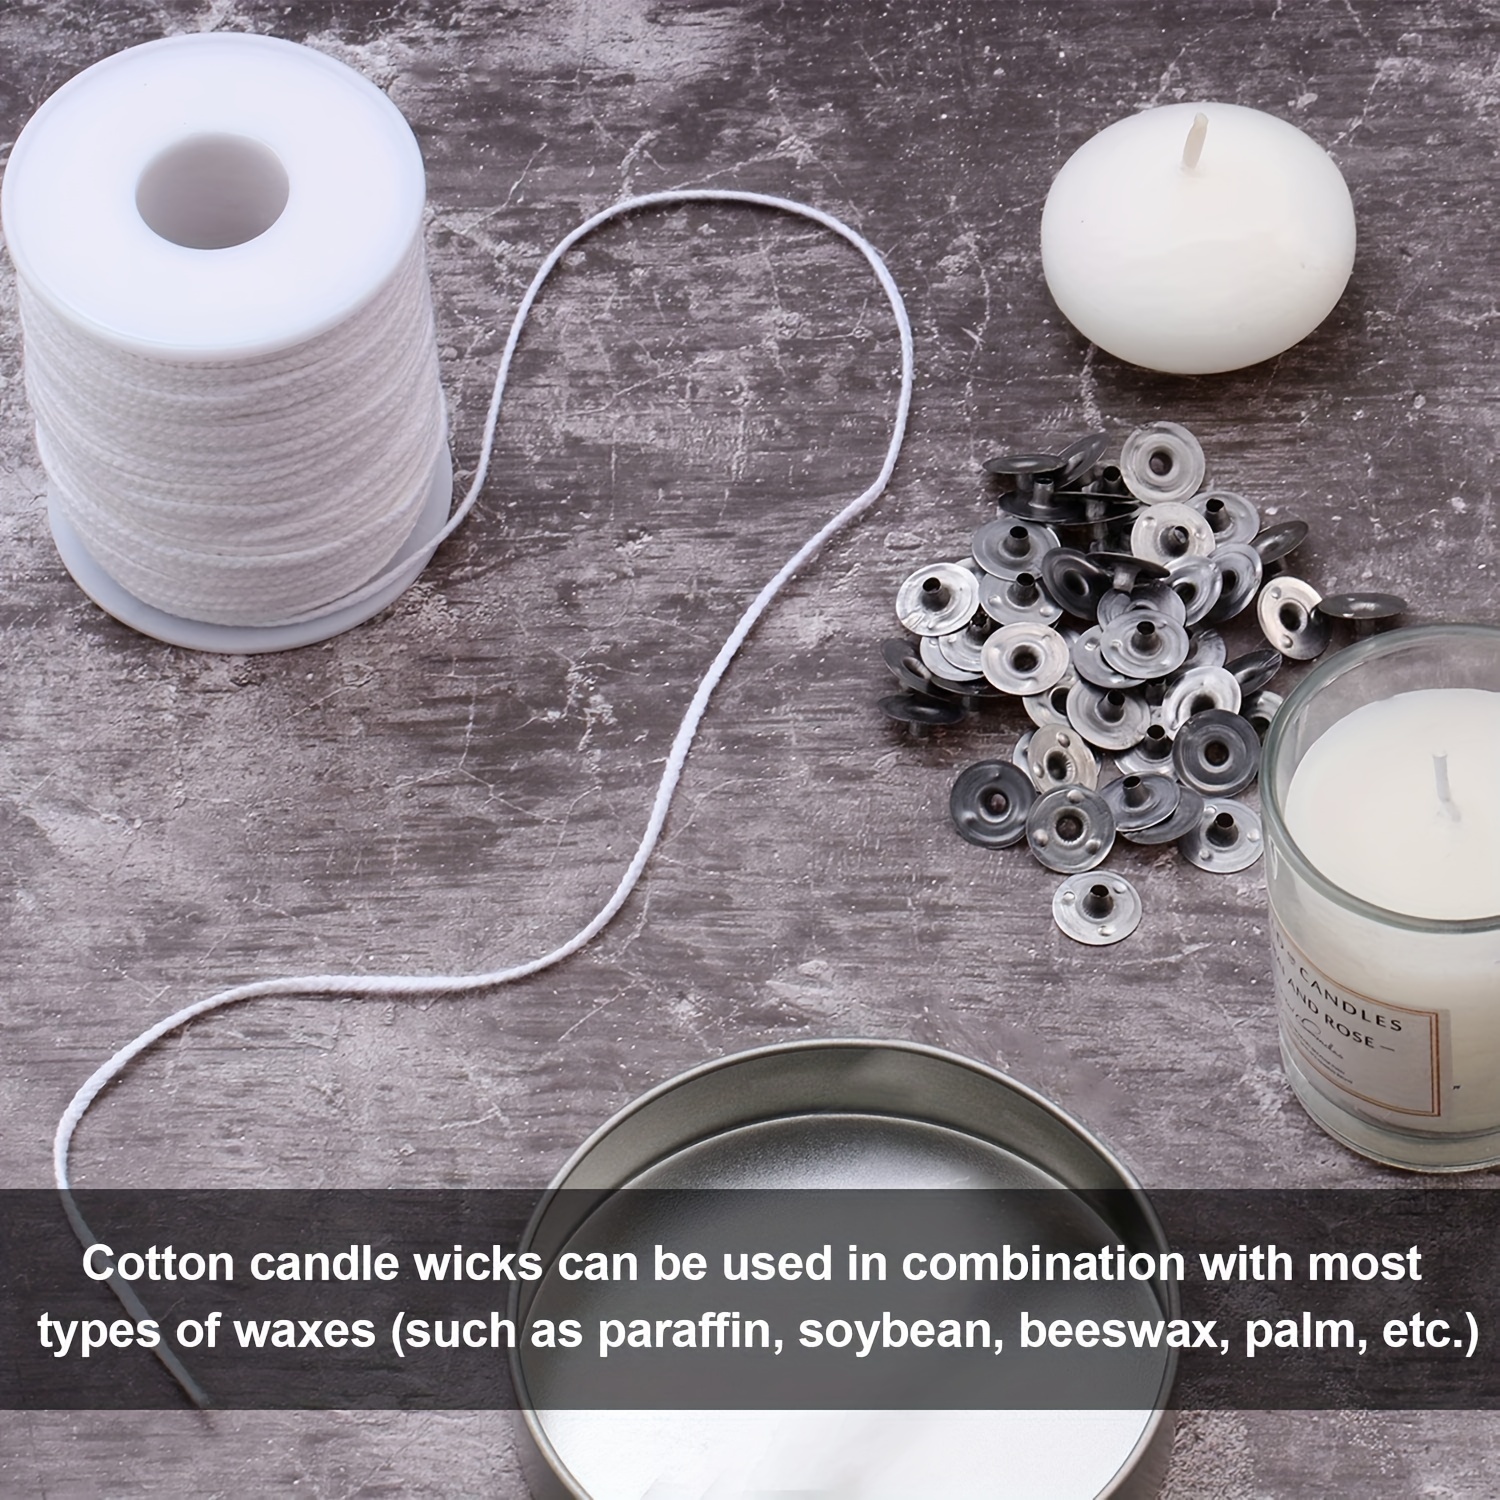 Candle Making Supplies  CD 6 Wicks - For Natural Wax and Paraffin (25 PCS)  - Candle Making Supplies